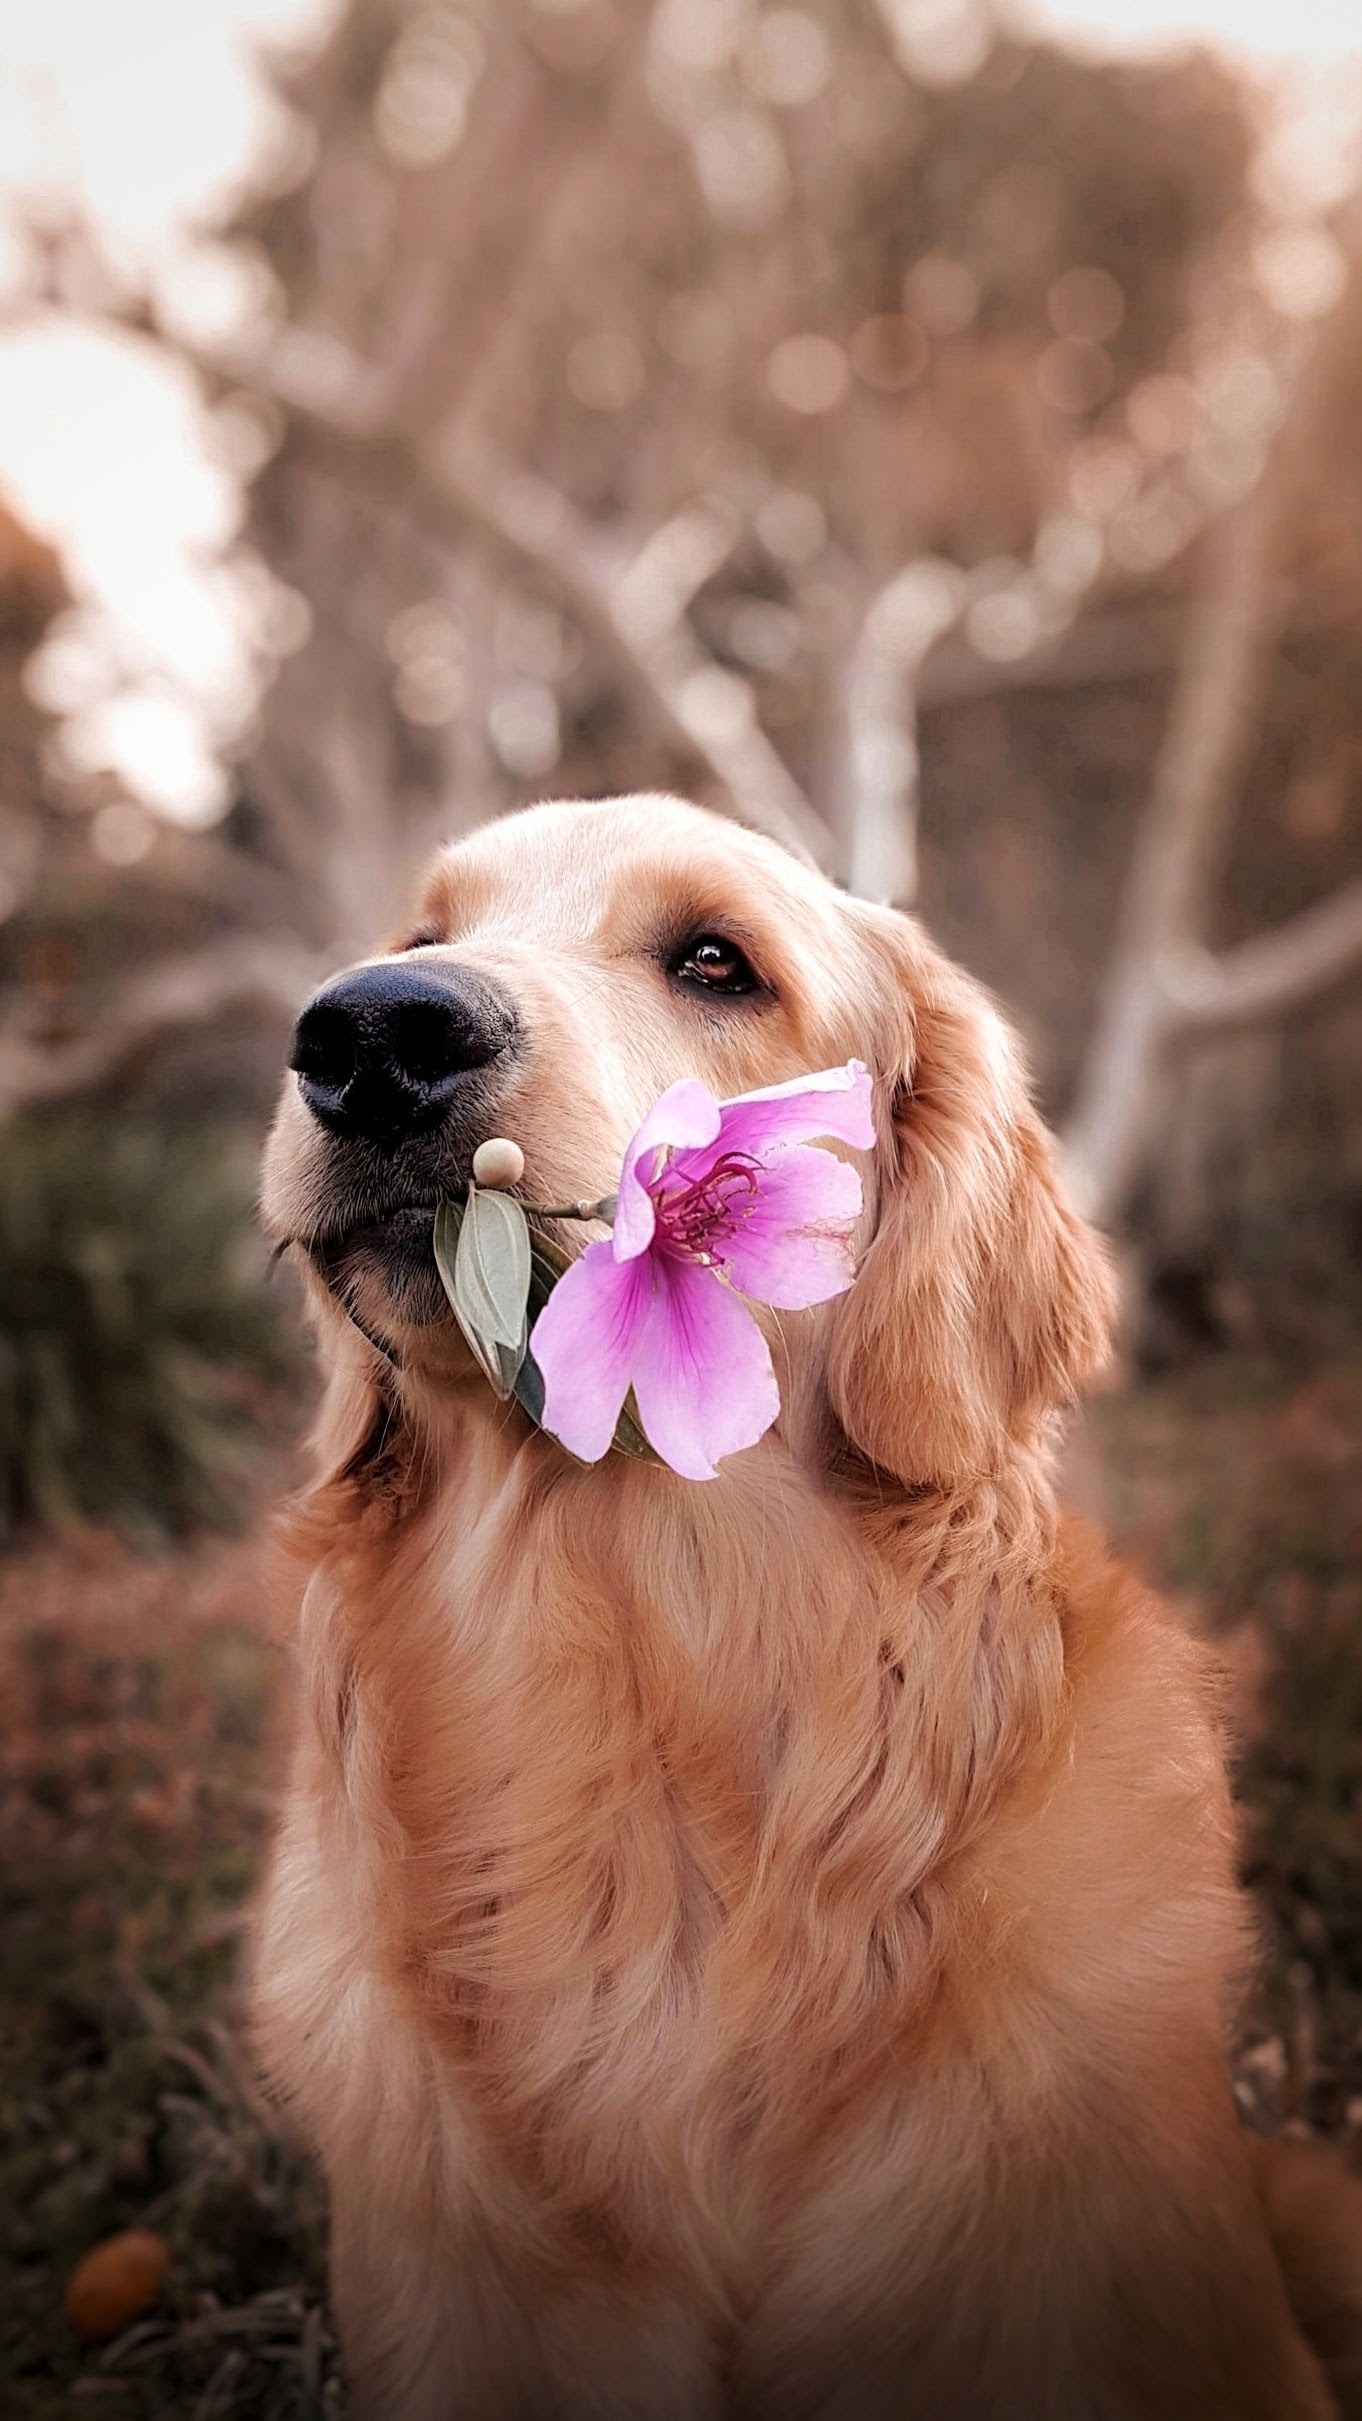 Common Allergies in Dogs